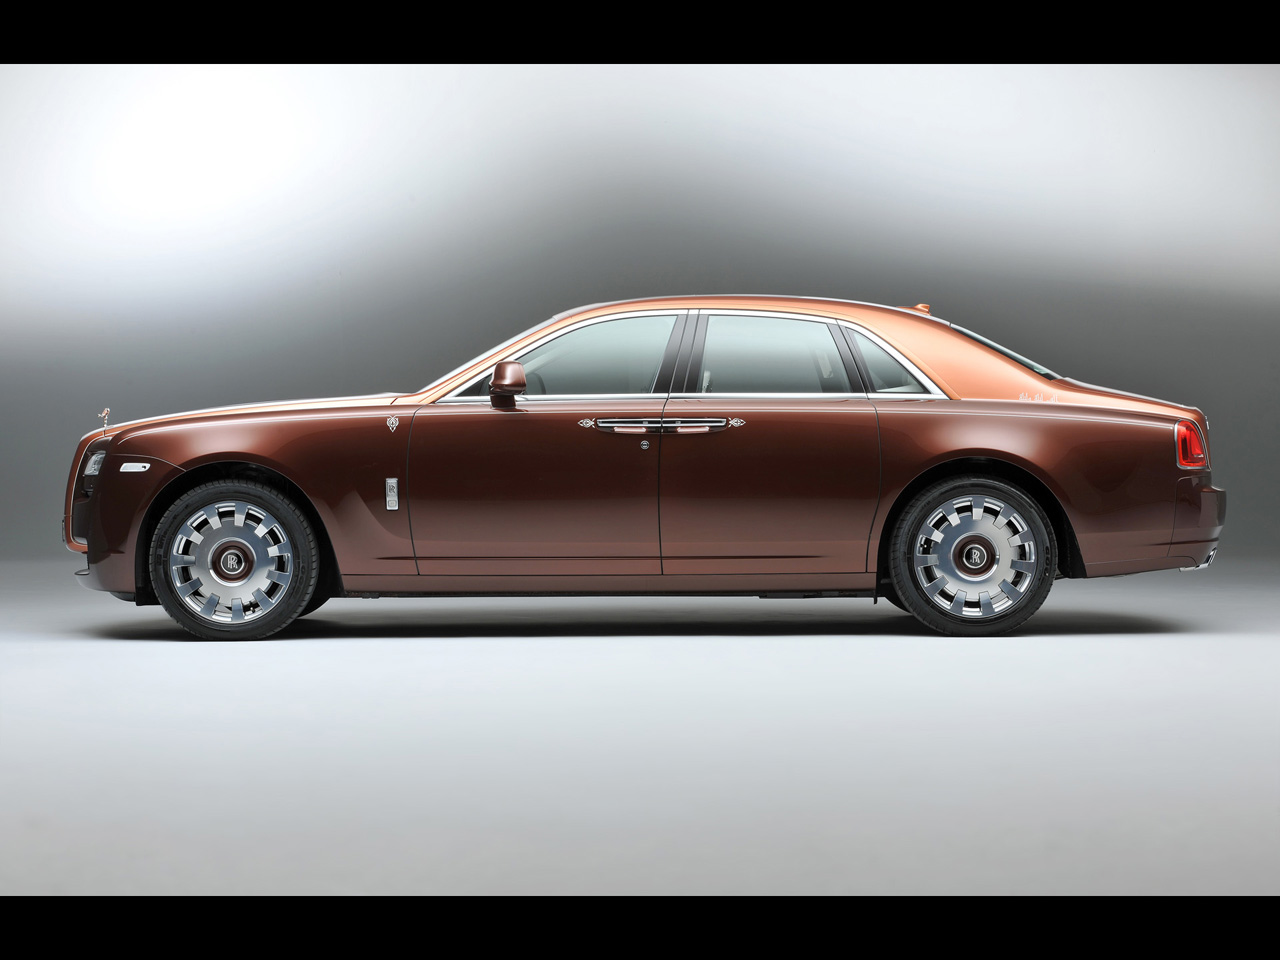 2013 Rolls-Royce One Thousand and One Nights